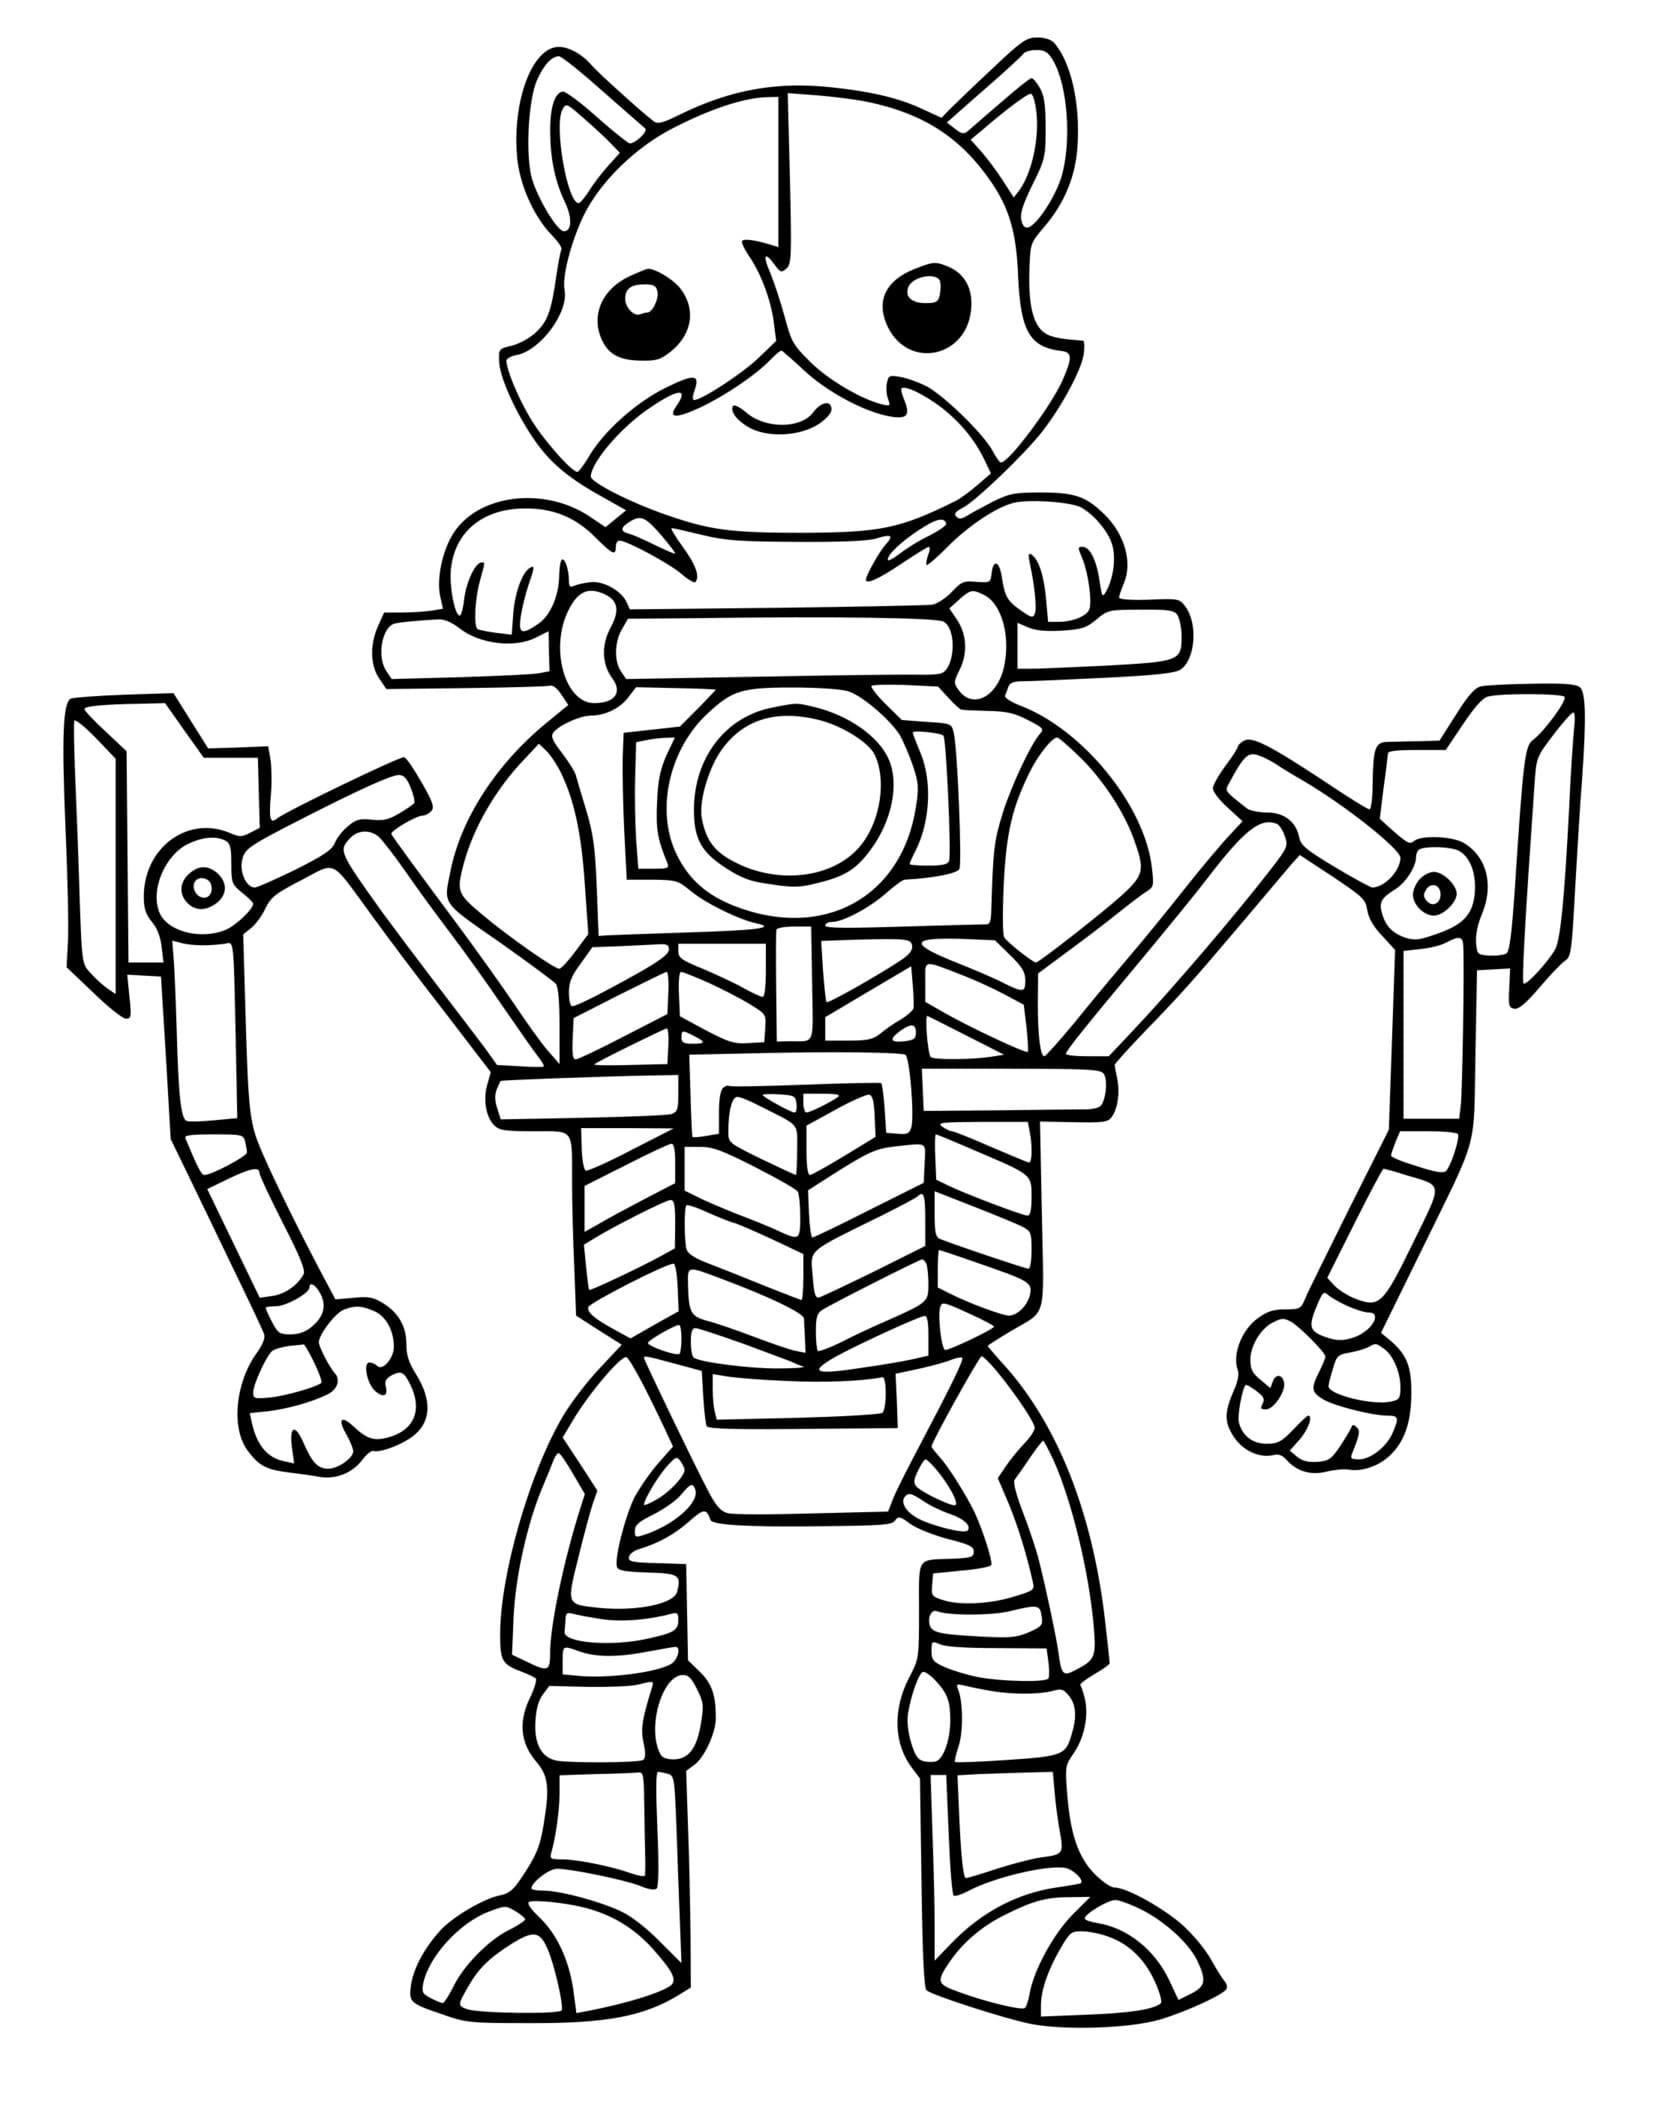 Kit Cat Fortnite Coloring Page